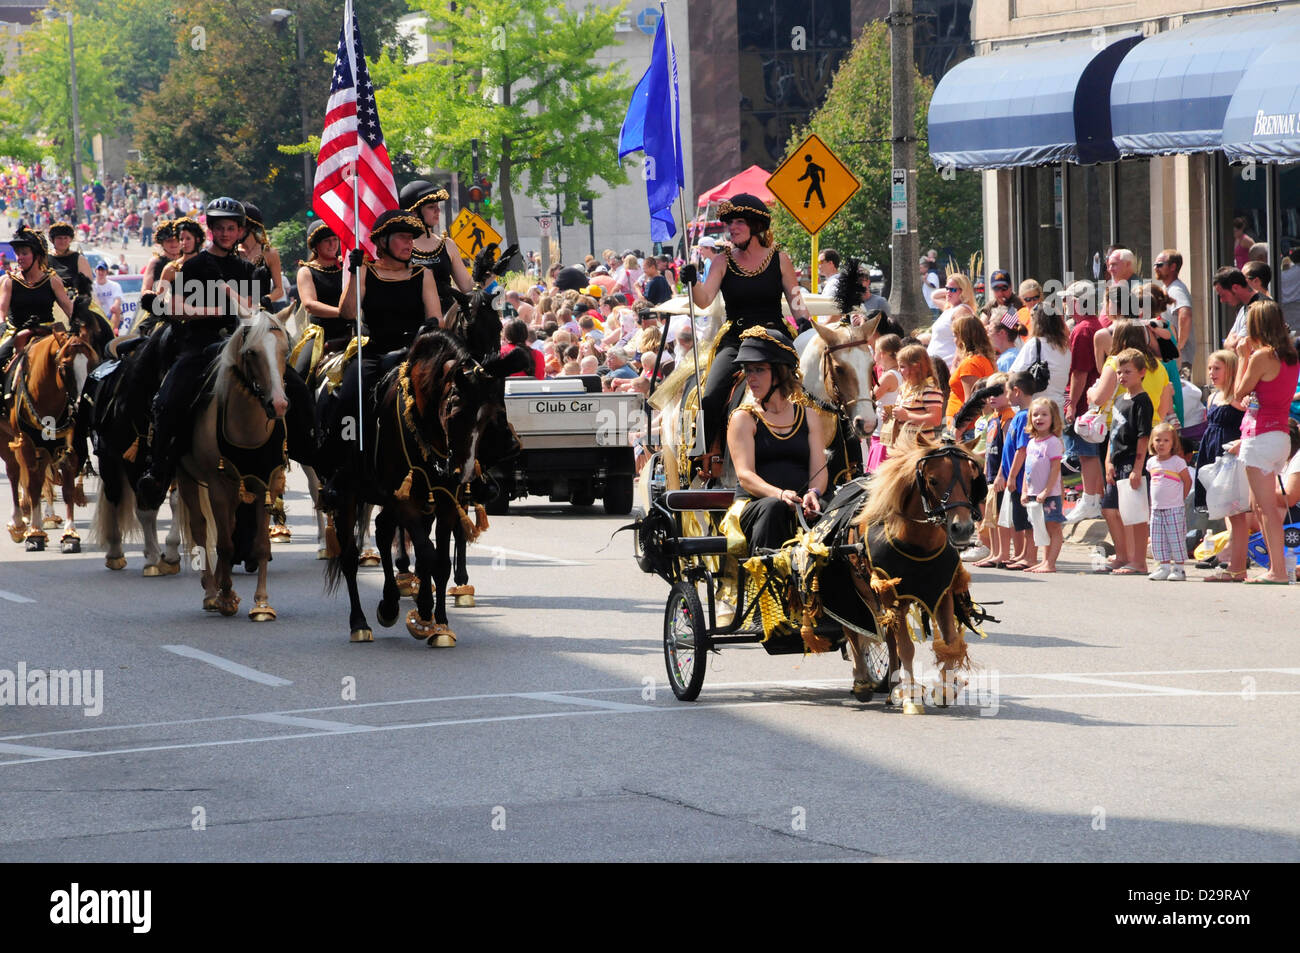 Horse Troupe In Parade, Janesville, Wisconsin Stock Photo